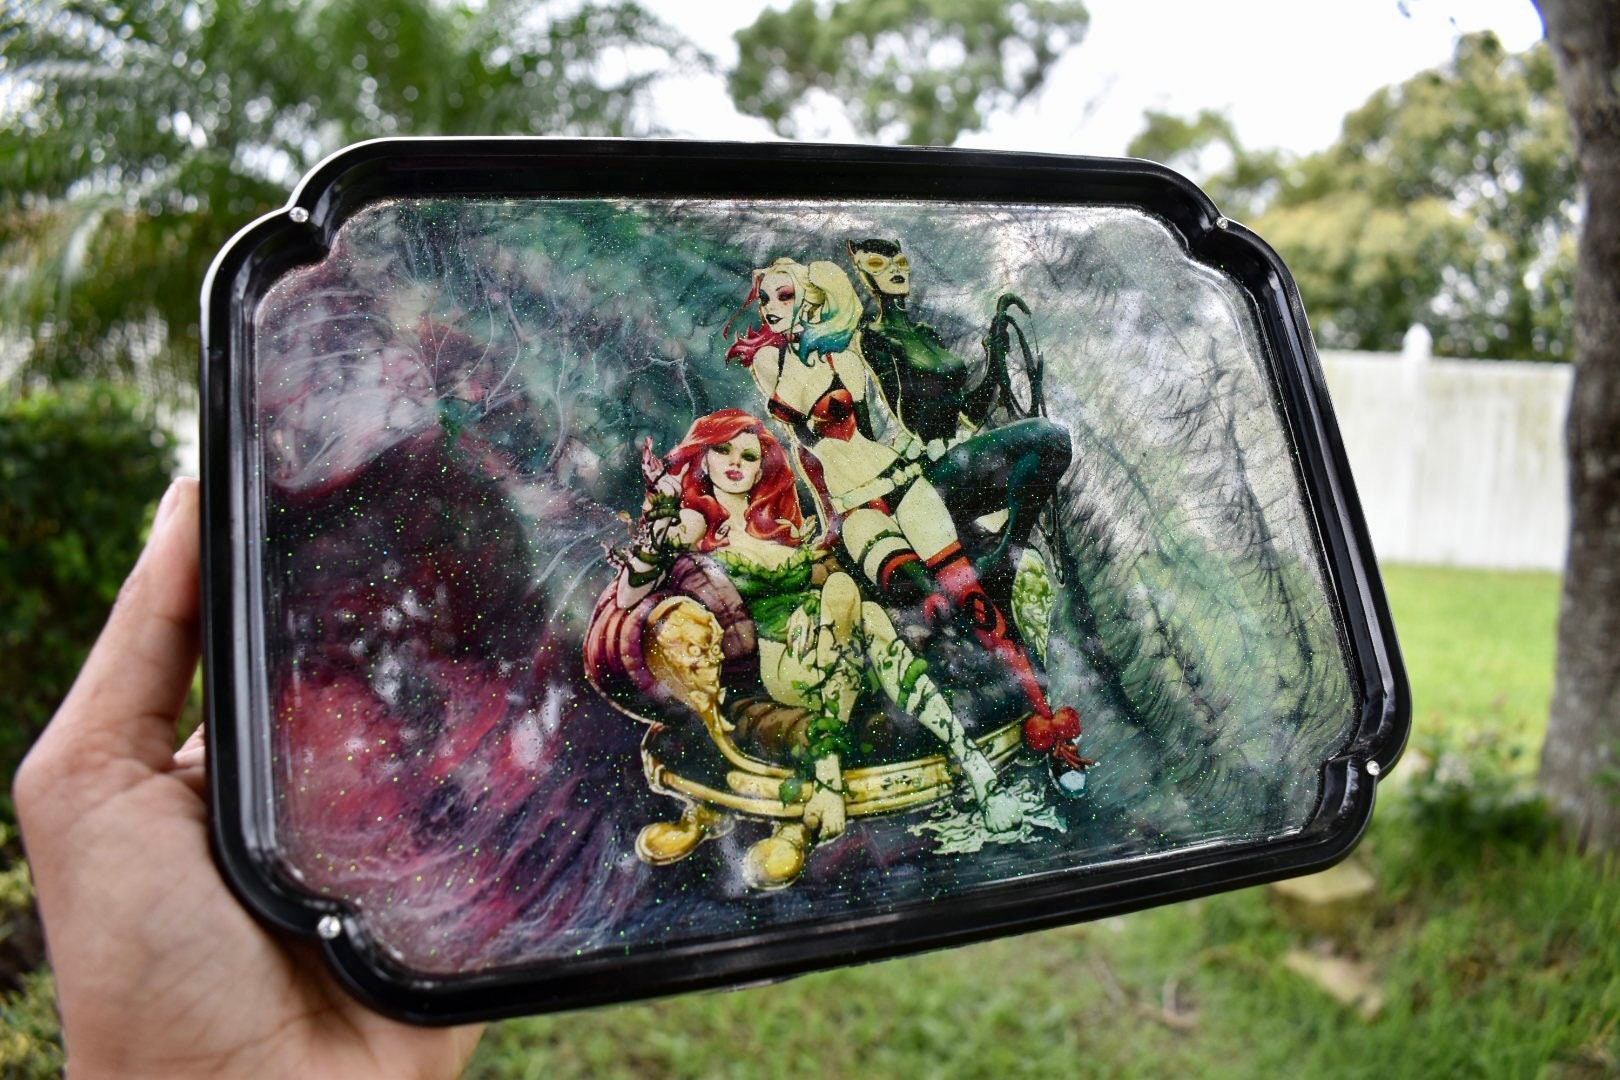 Custom Resin Rolling Trays: NOT RECOMMENDED – My Rolling Tray